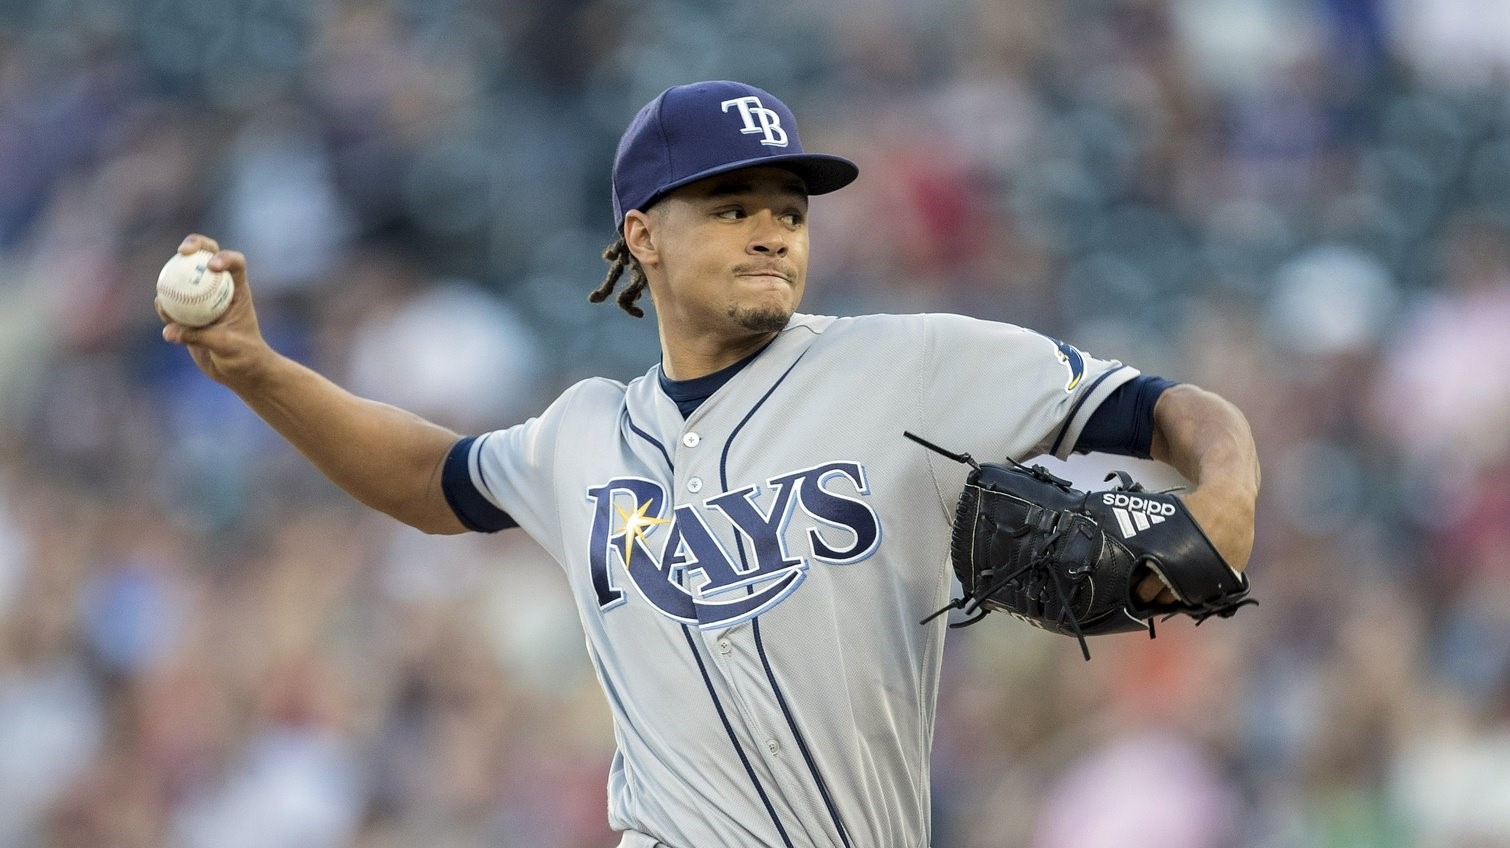 Twins add former Rays, Pirates pitcher Chris Archer to rotation